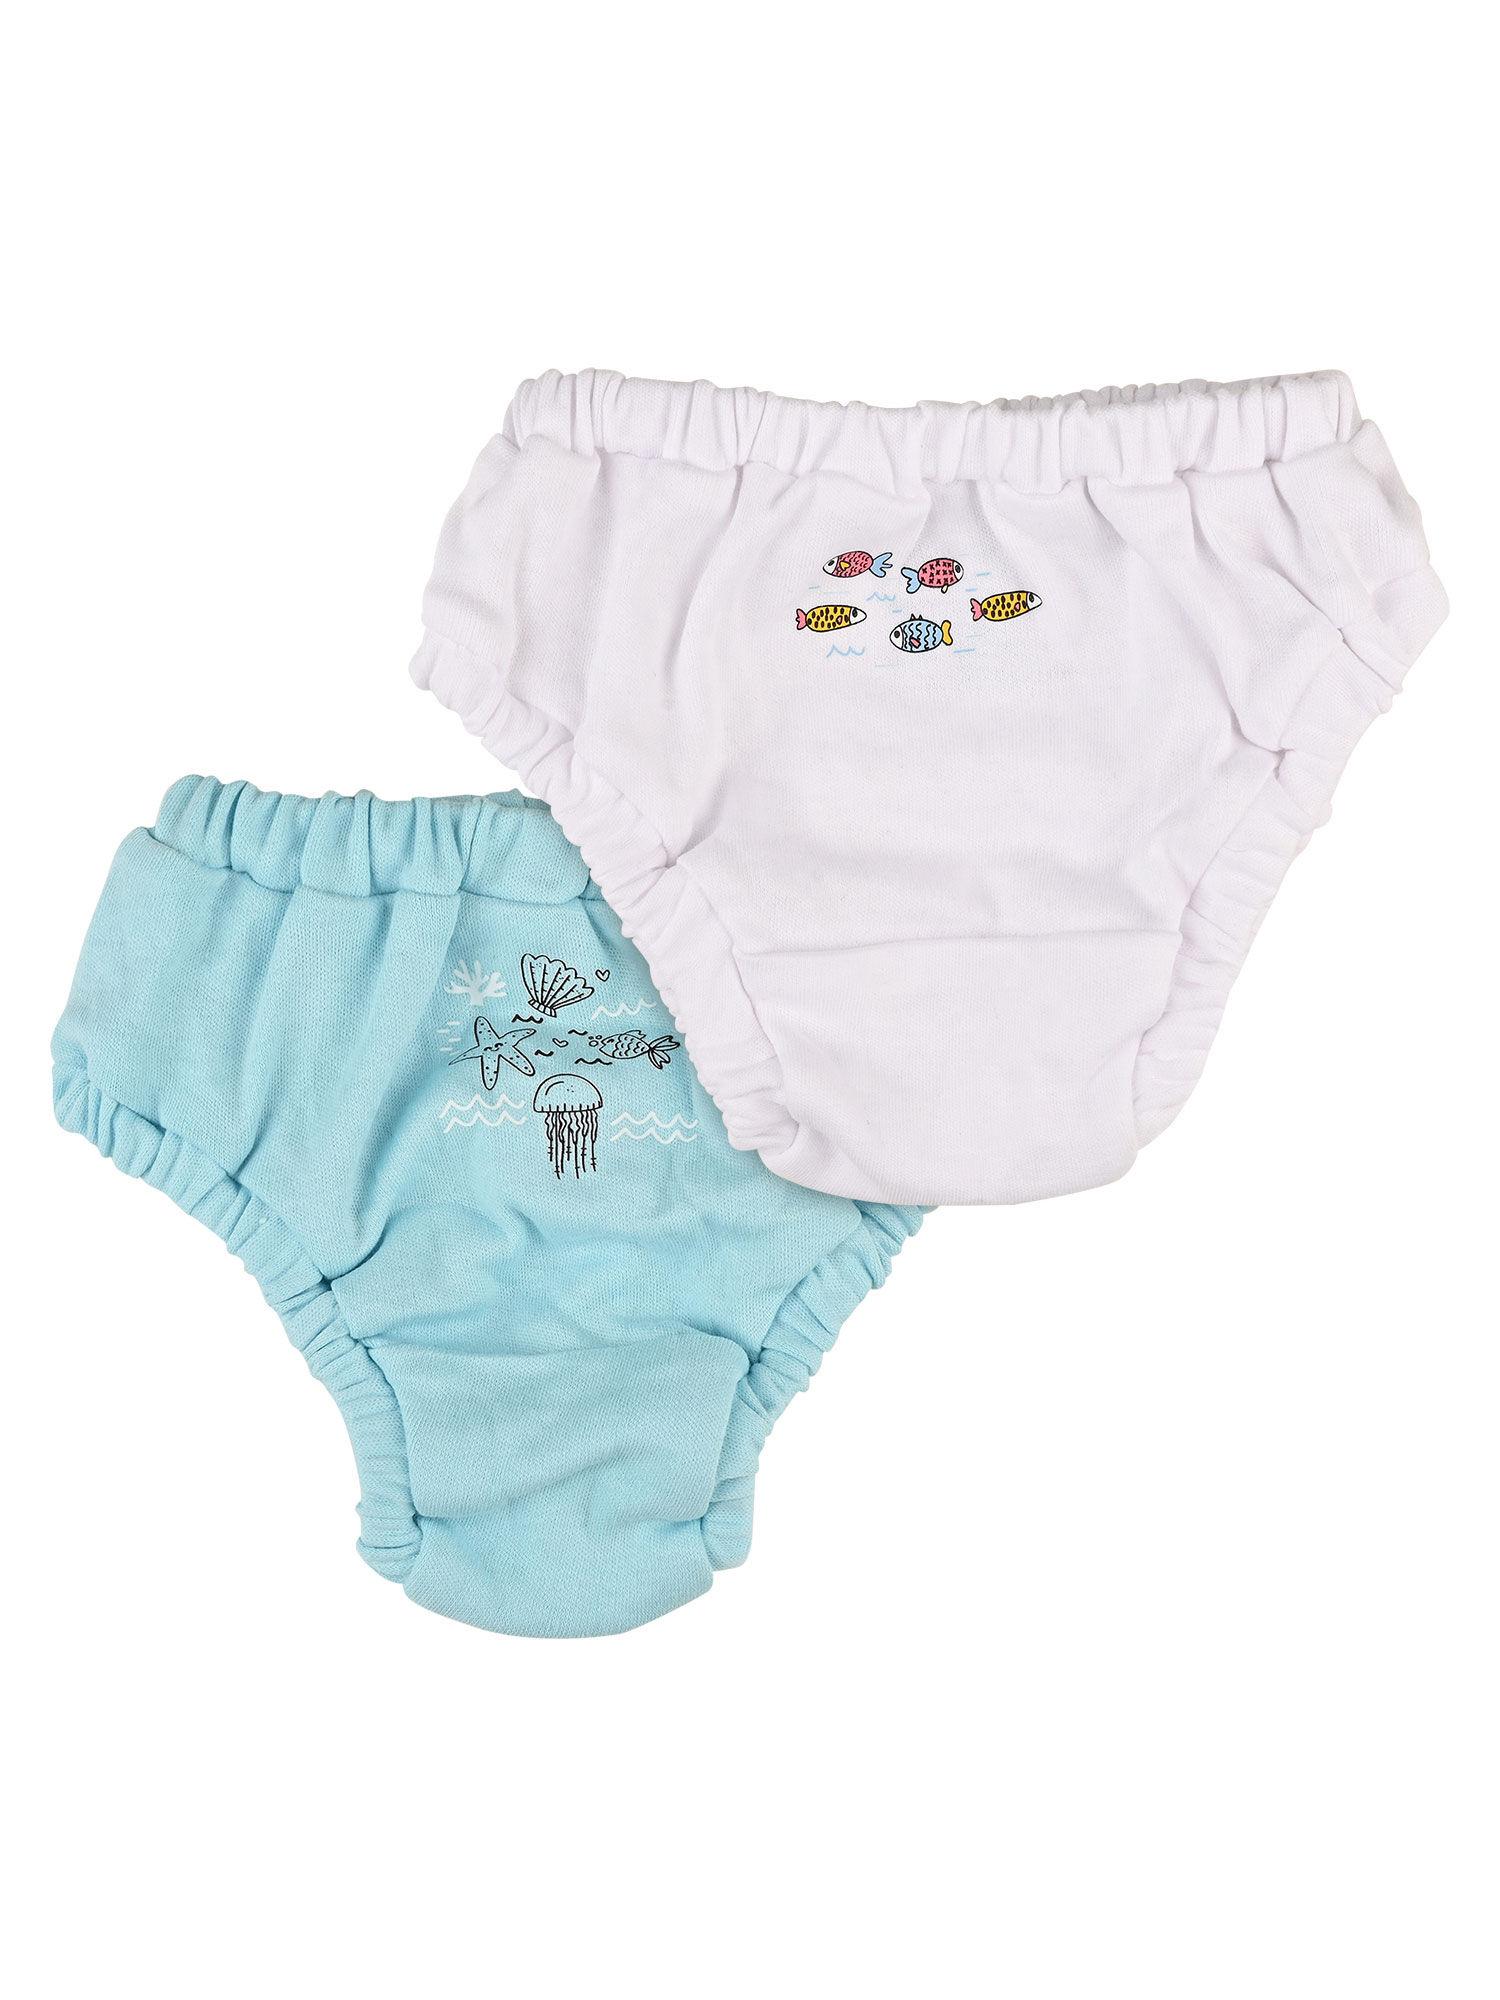 baby-girls-printed-bloomer-brief-underwear-blue-and-white-(pack-of-2)